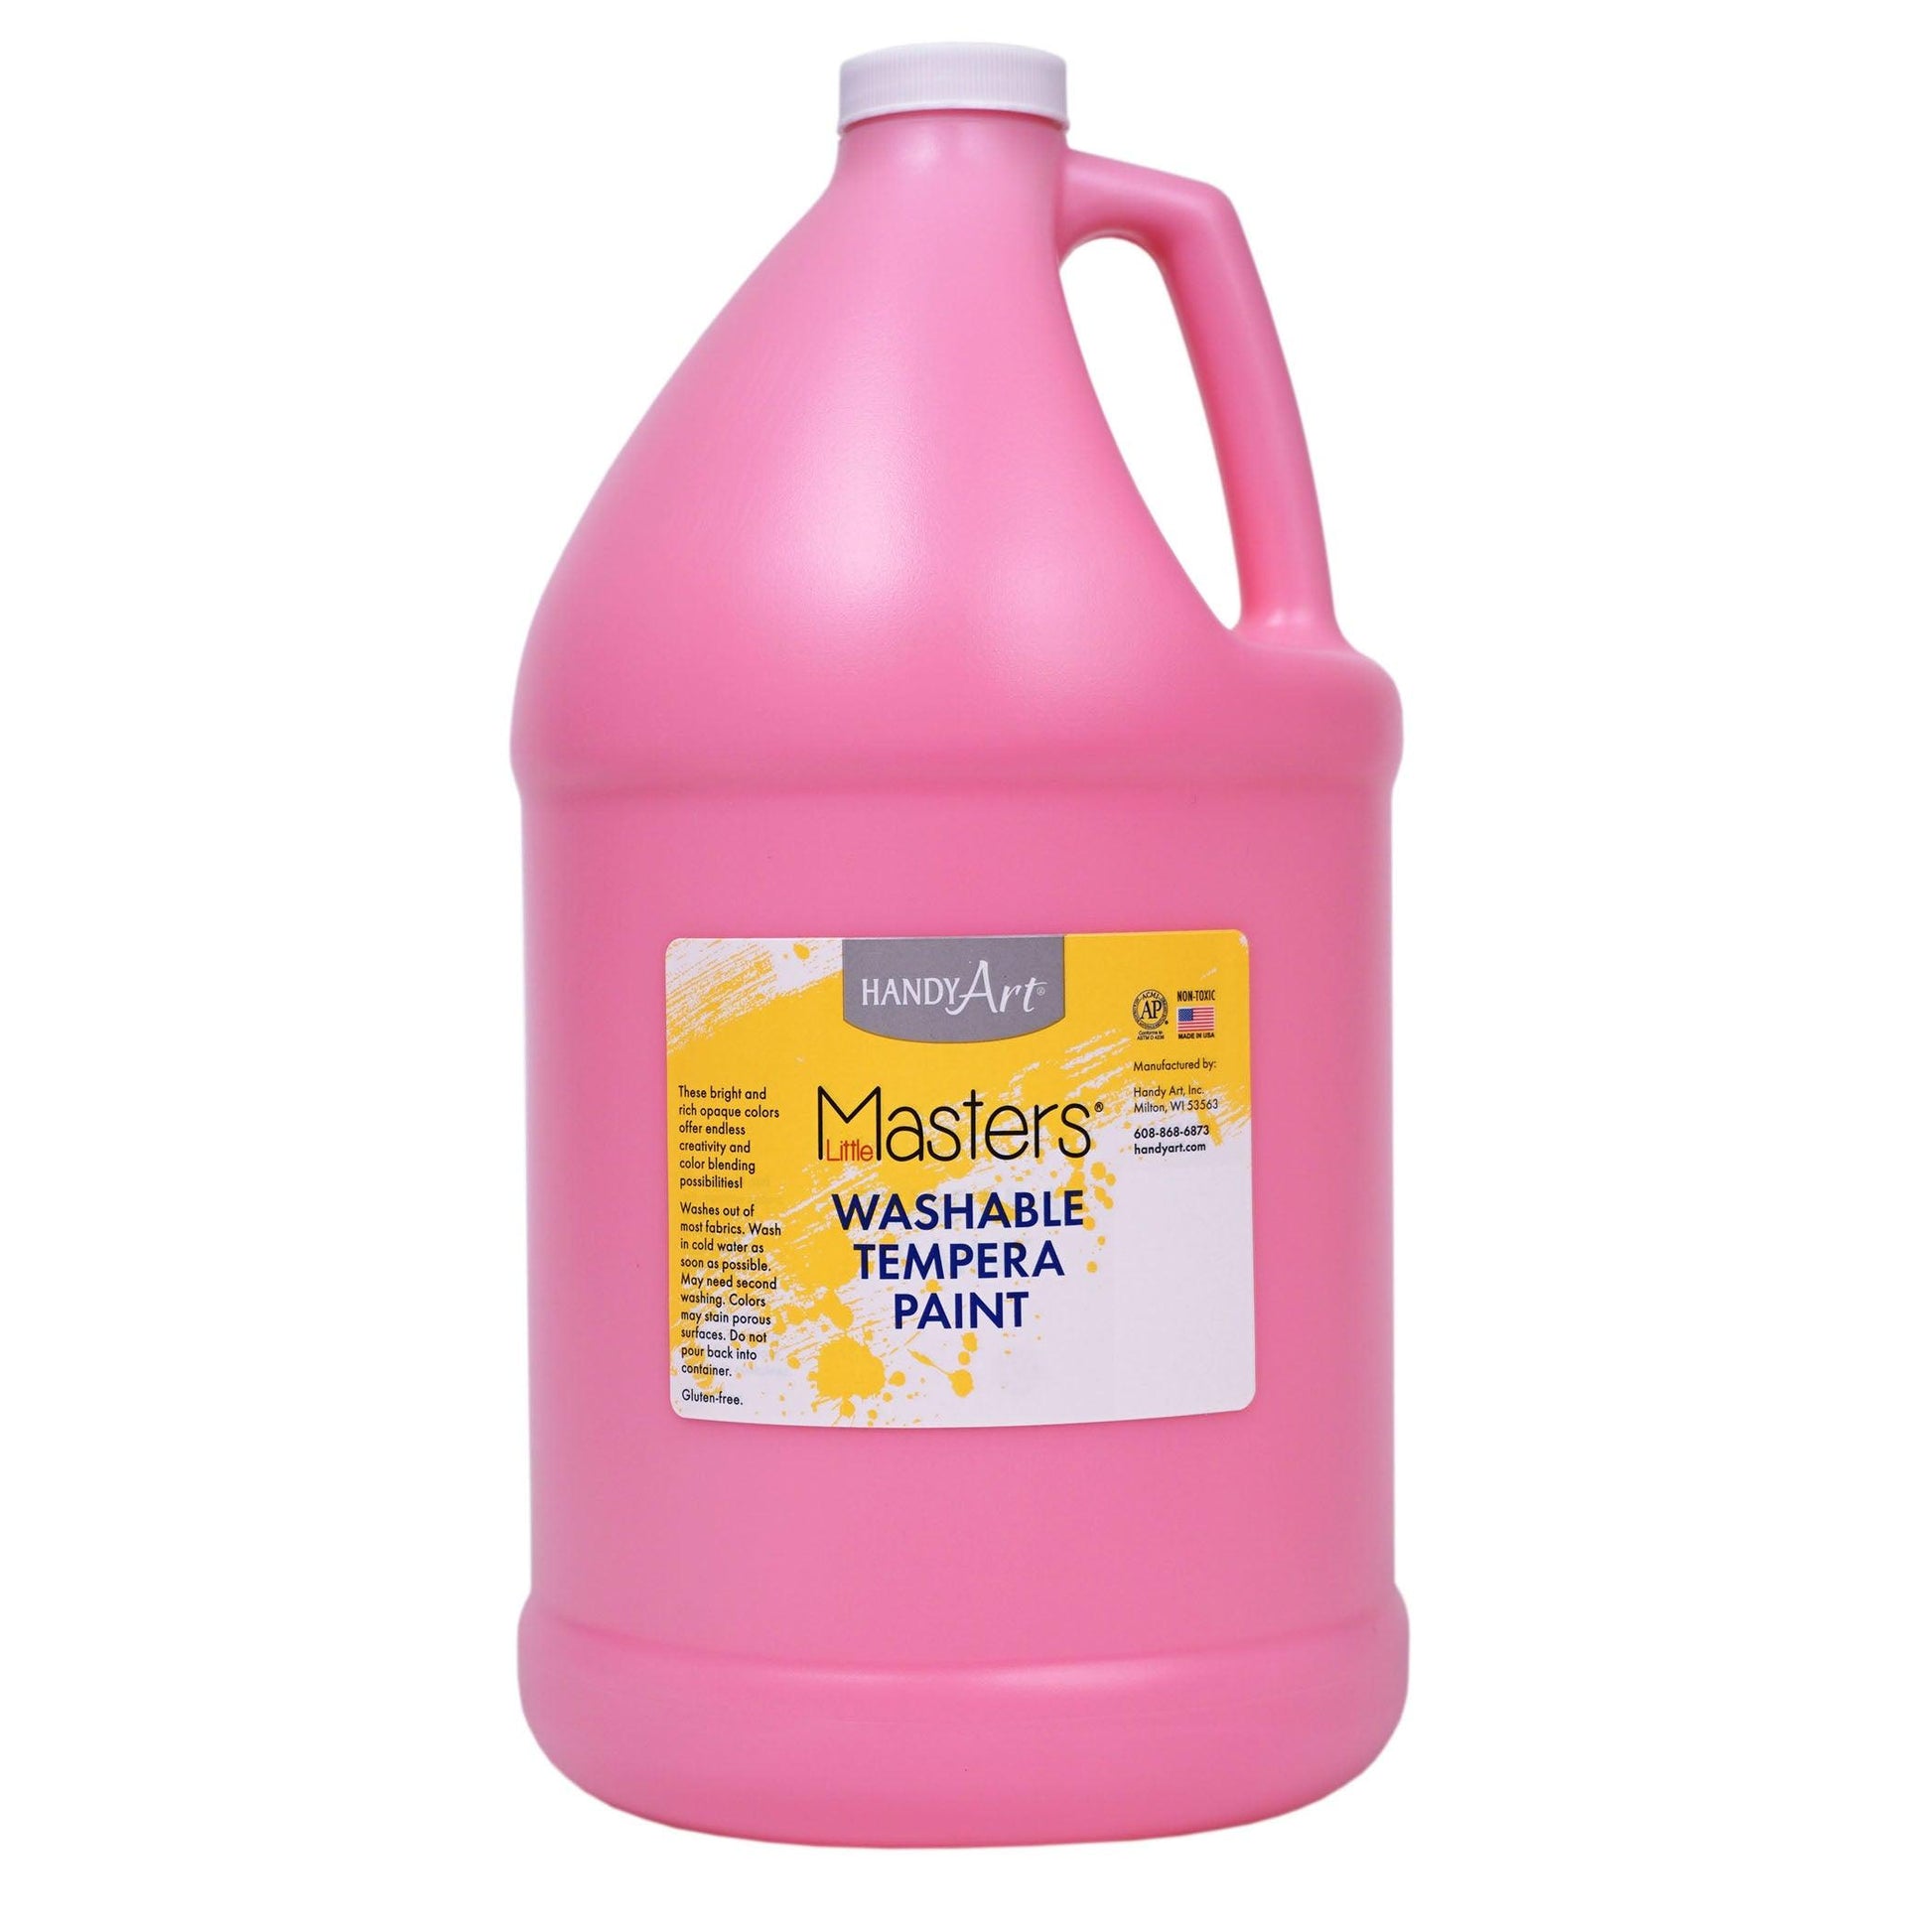 Little Masters® Washable Tempera Paint, Pink, Gallon, Pack of 2 - Loomini